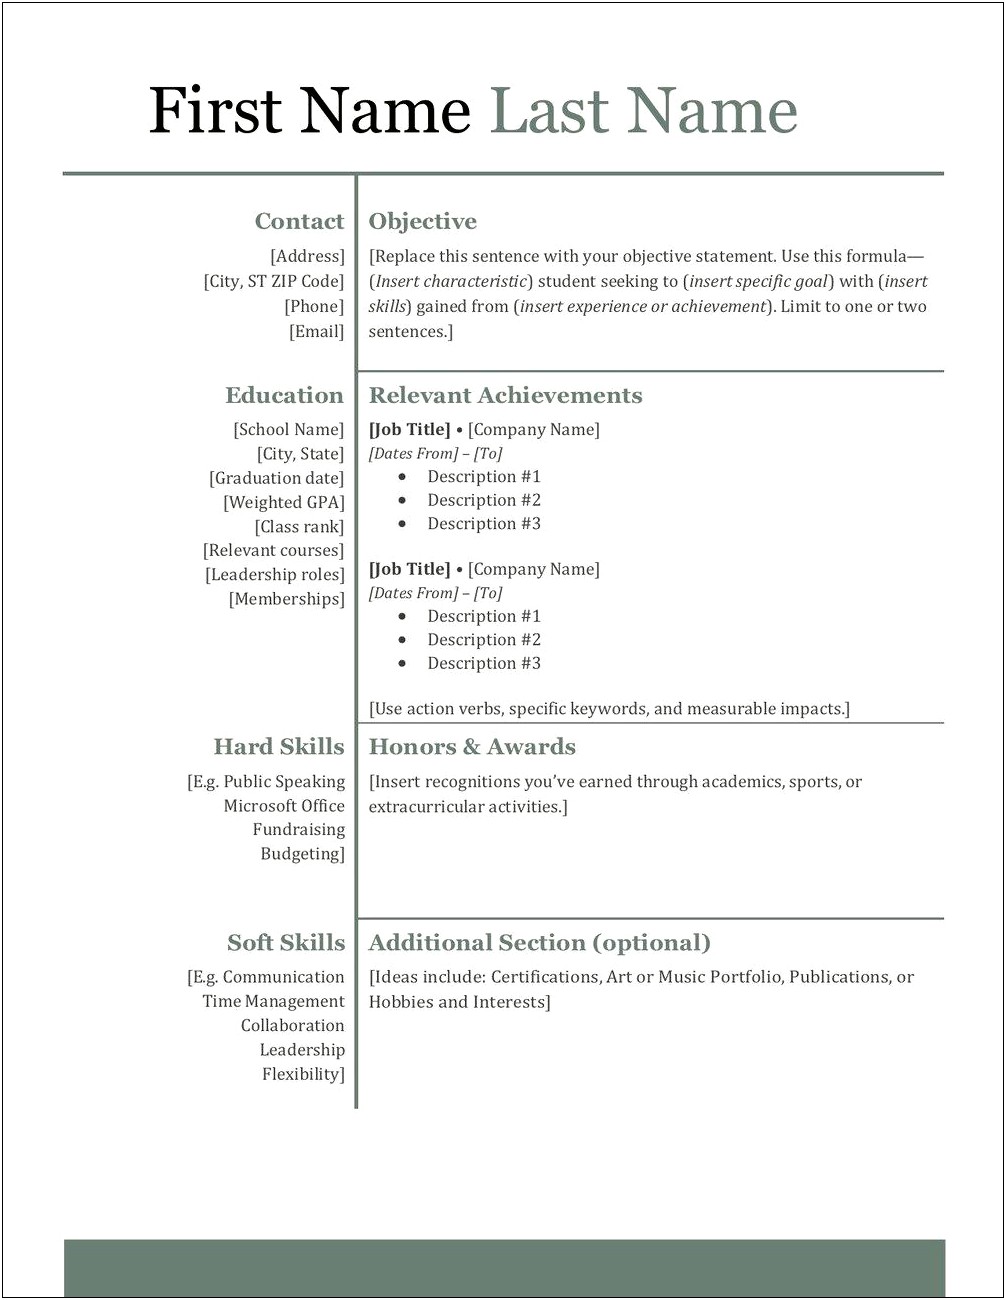 Resume Skill Related To Educations